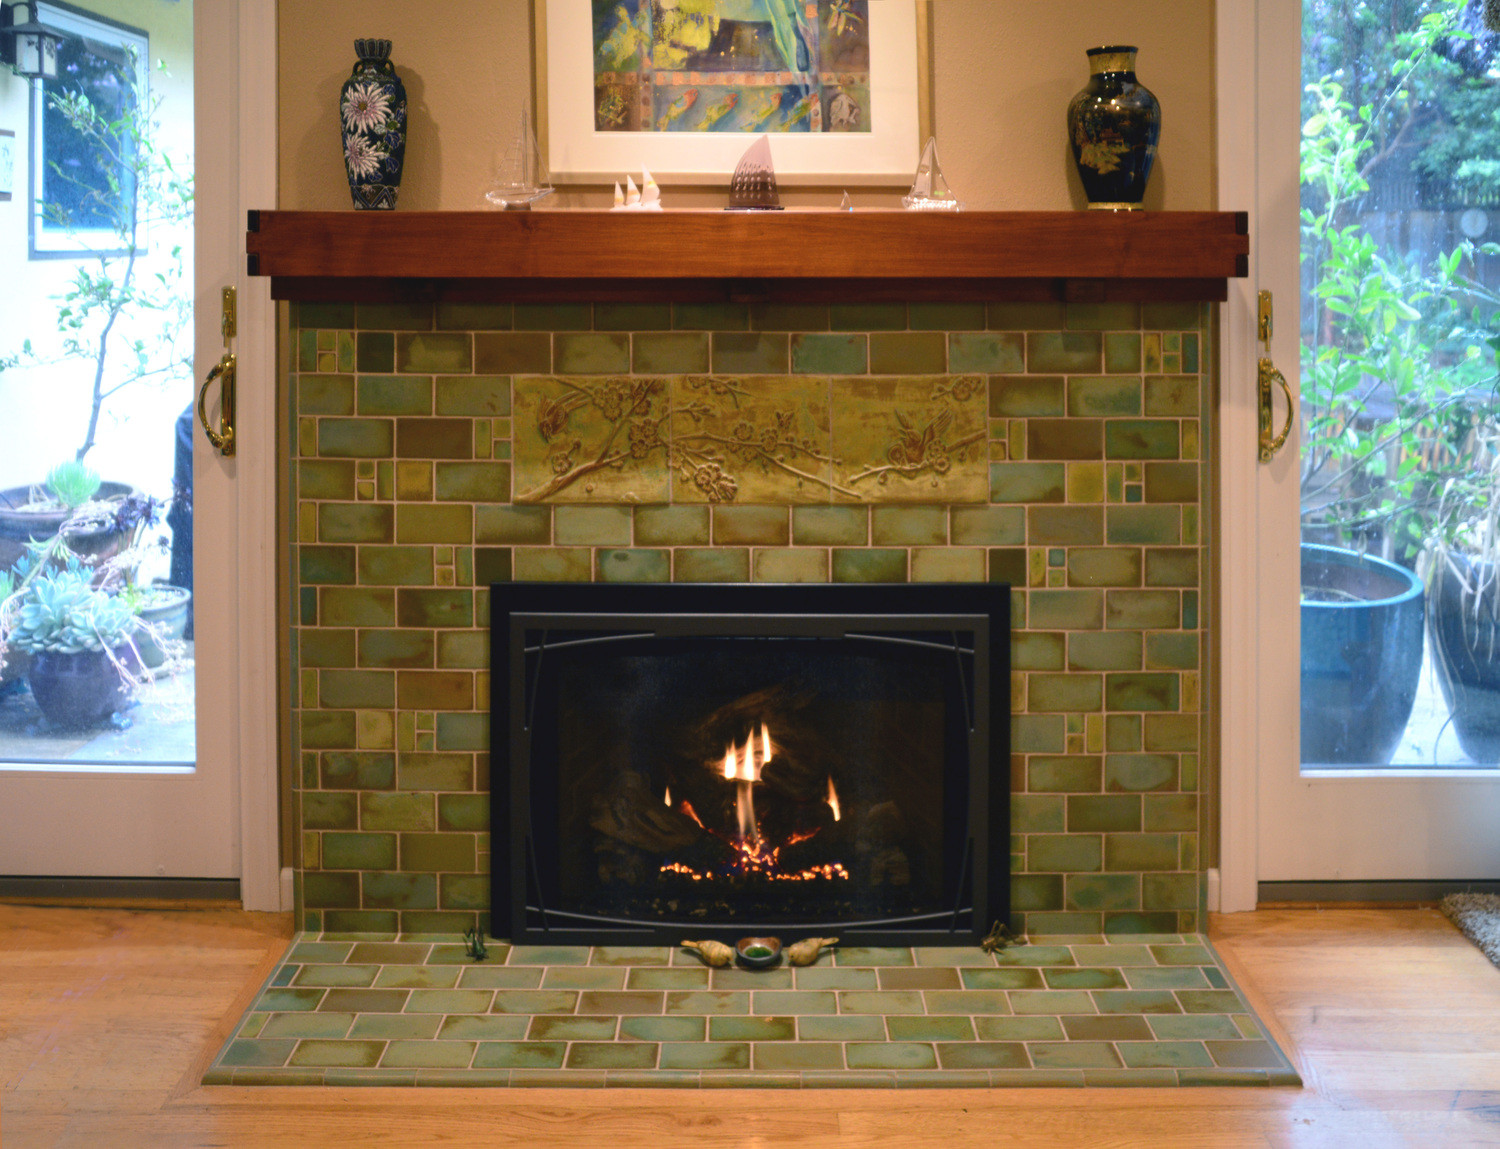 Custom tile and tile design in the Craftsman tradition.